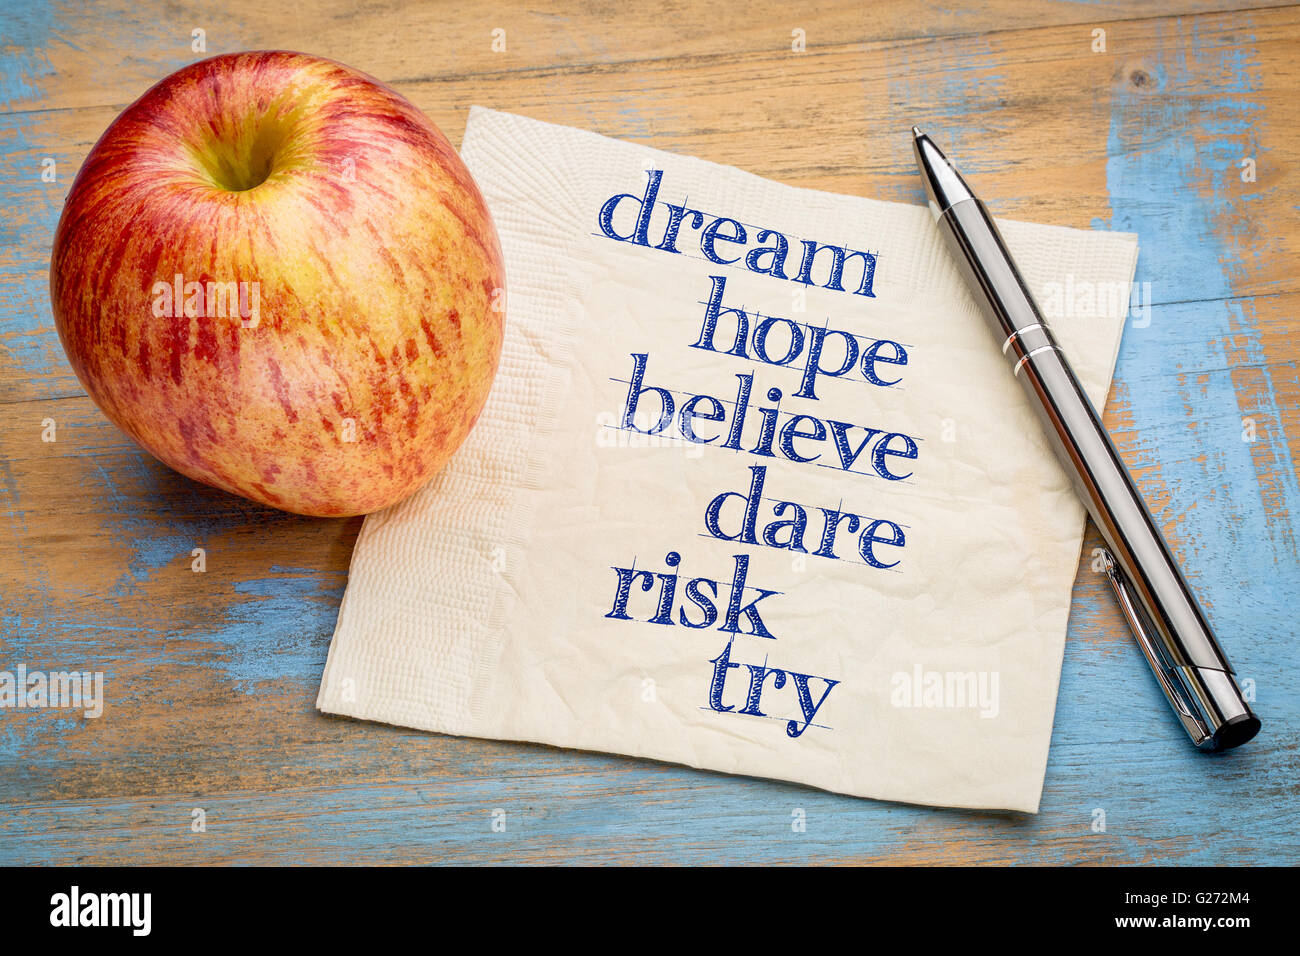 dream, hope, believe, dare, risk and try - handwriting on a napkin with a fresh apple Stock Photo